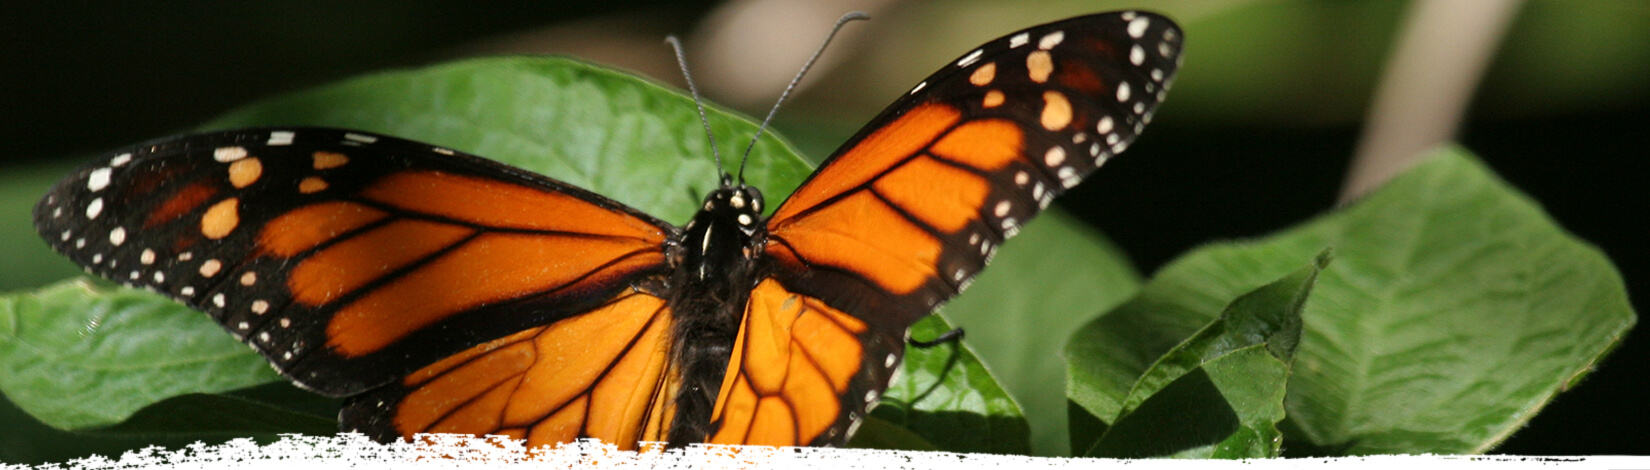 monarch butterfly close up